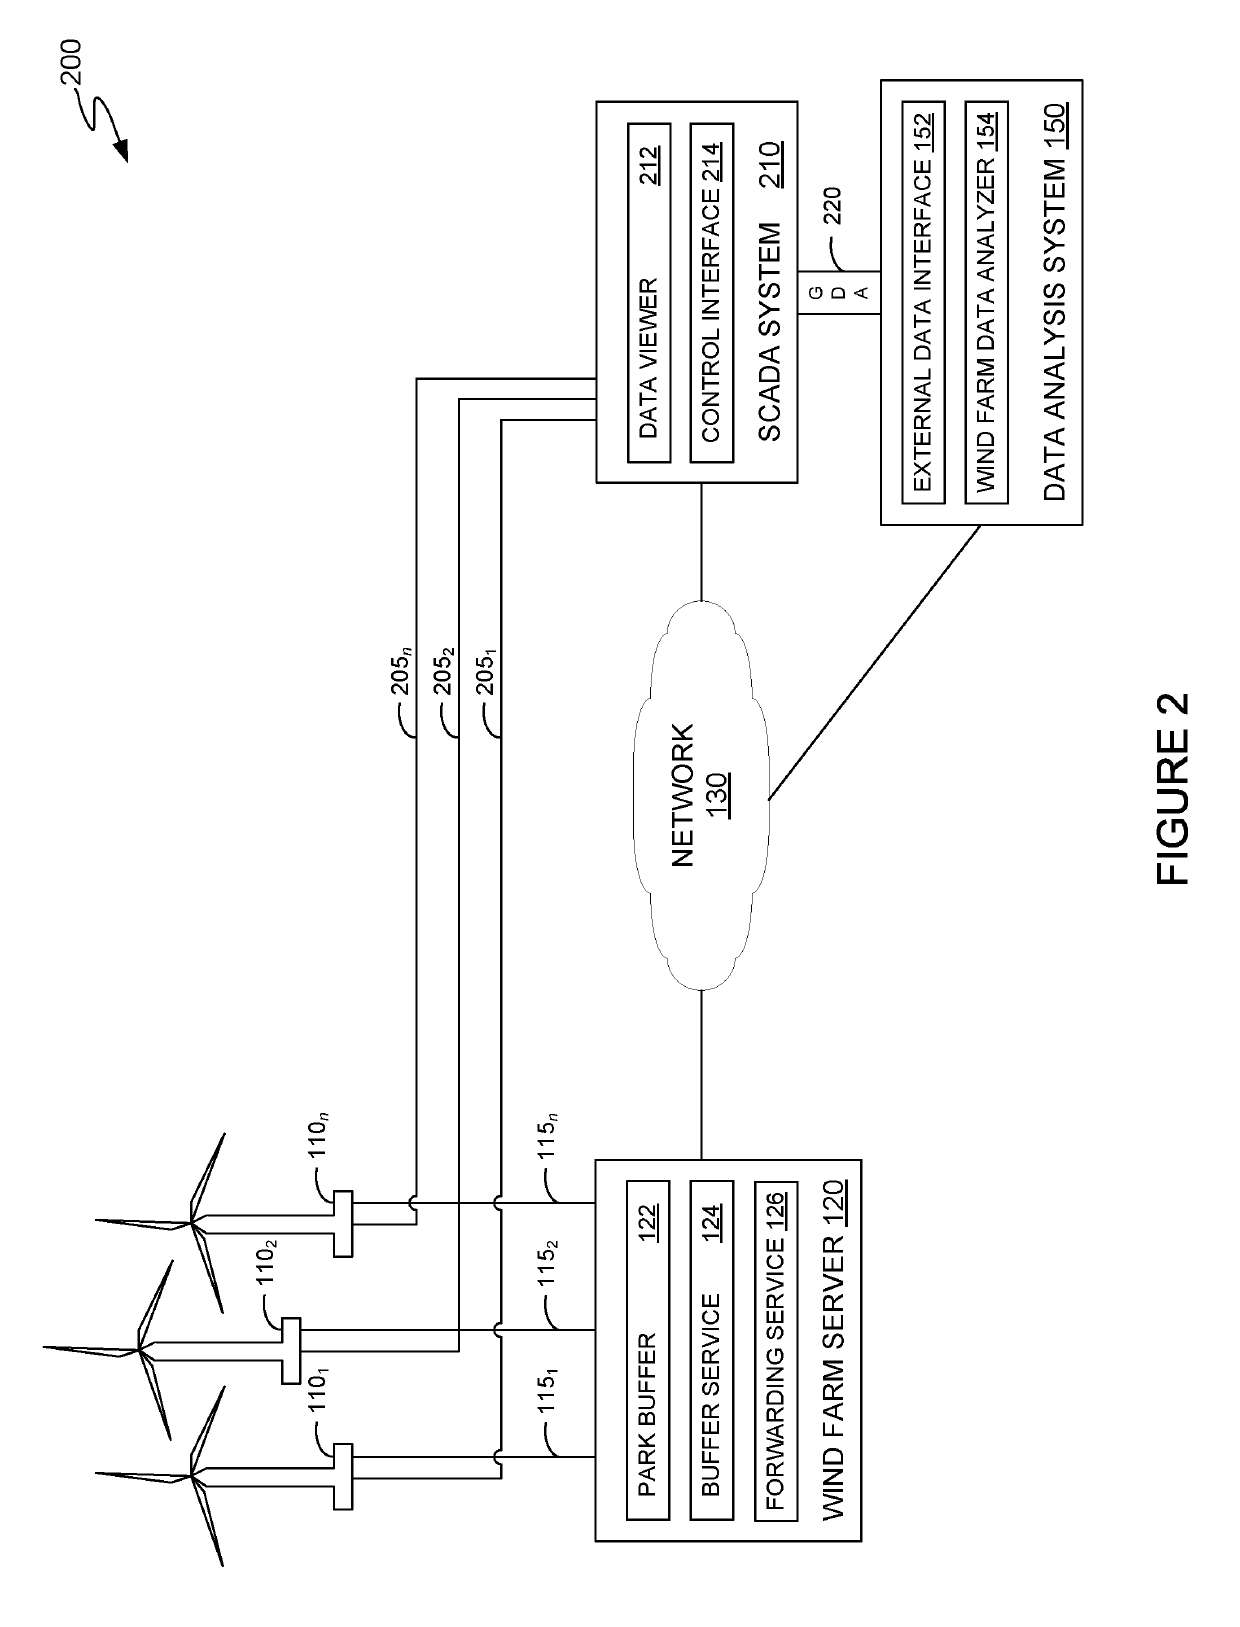 Data collection system for wind turbine data